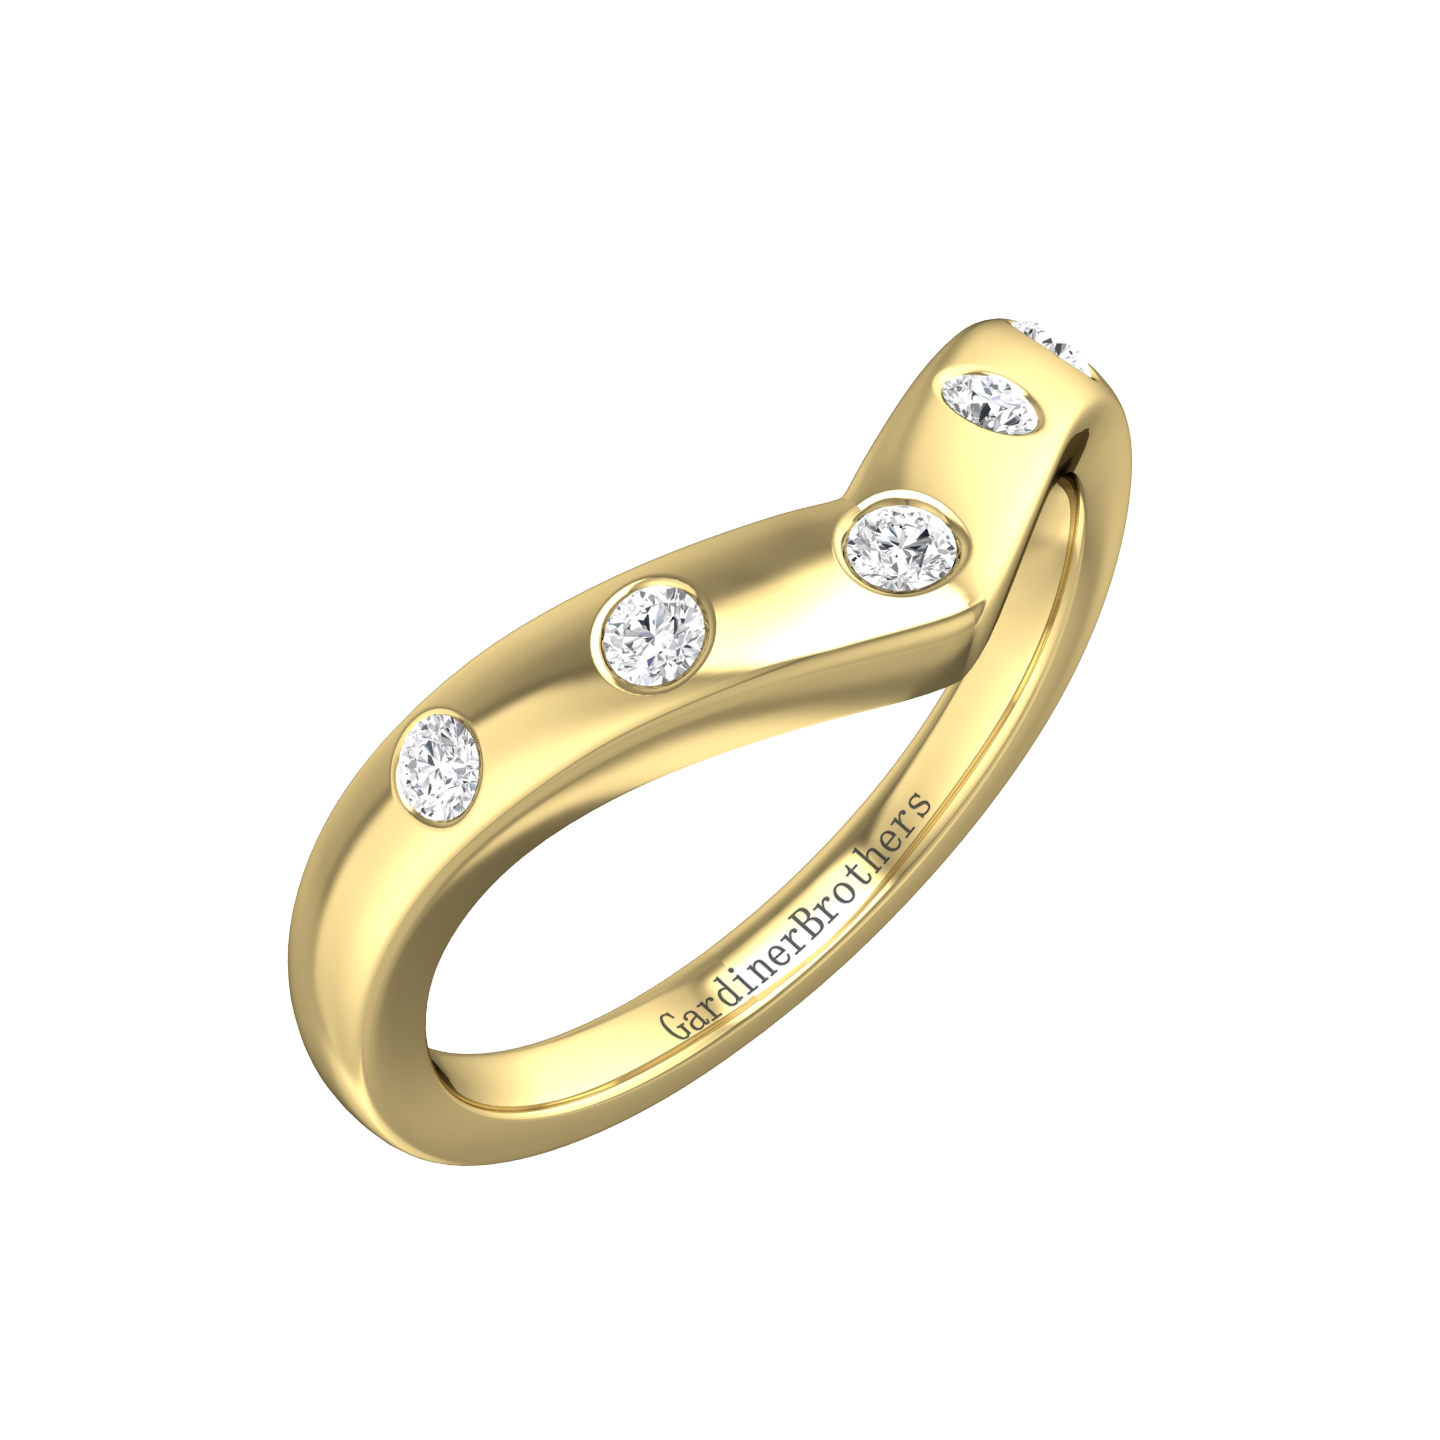 Bow Shaped Wedding Ring with 5 Round Brilliant Cut Diamonds  Gardiner Brothers 0.10cts 18ct Yellow Gold 